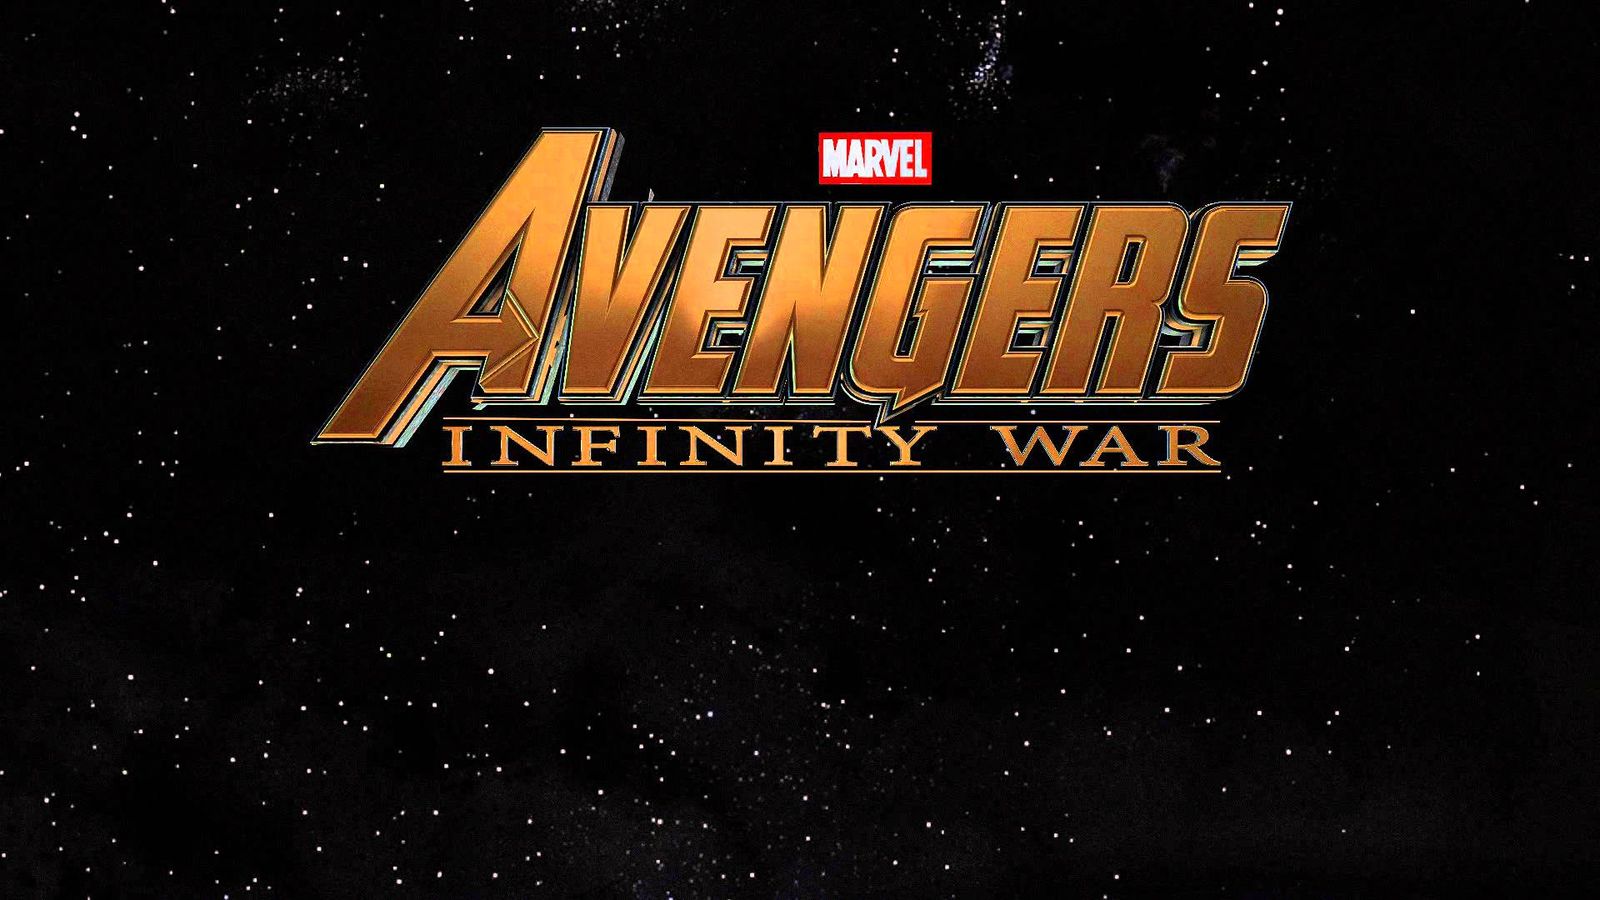 Black Panther Will Be Appearing In Avengers: Infinity War